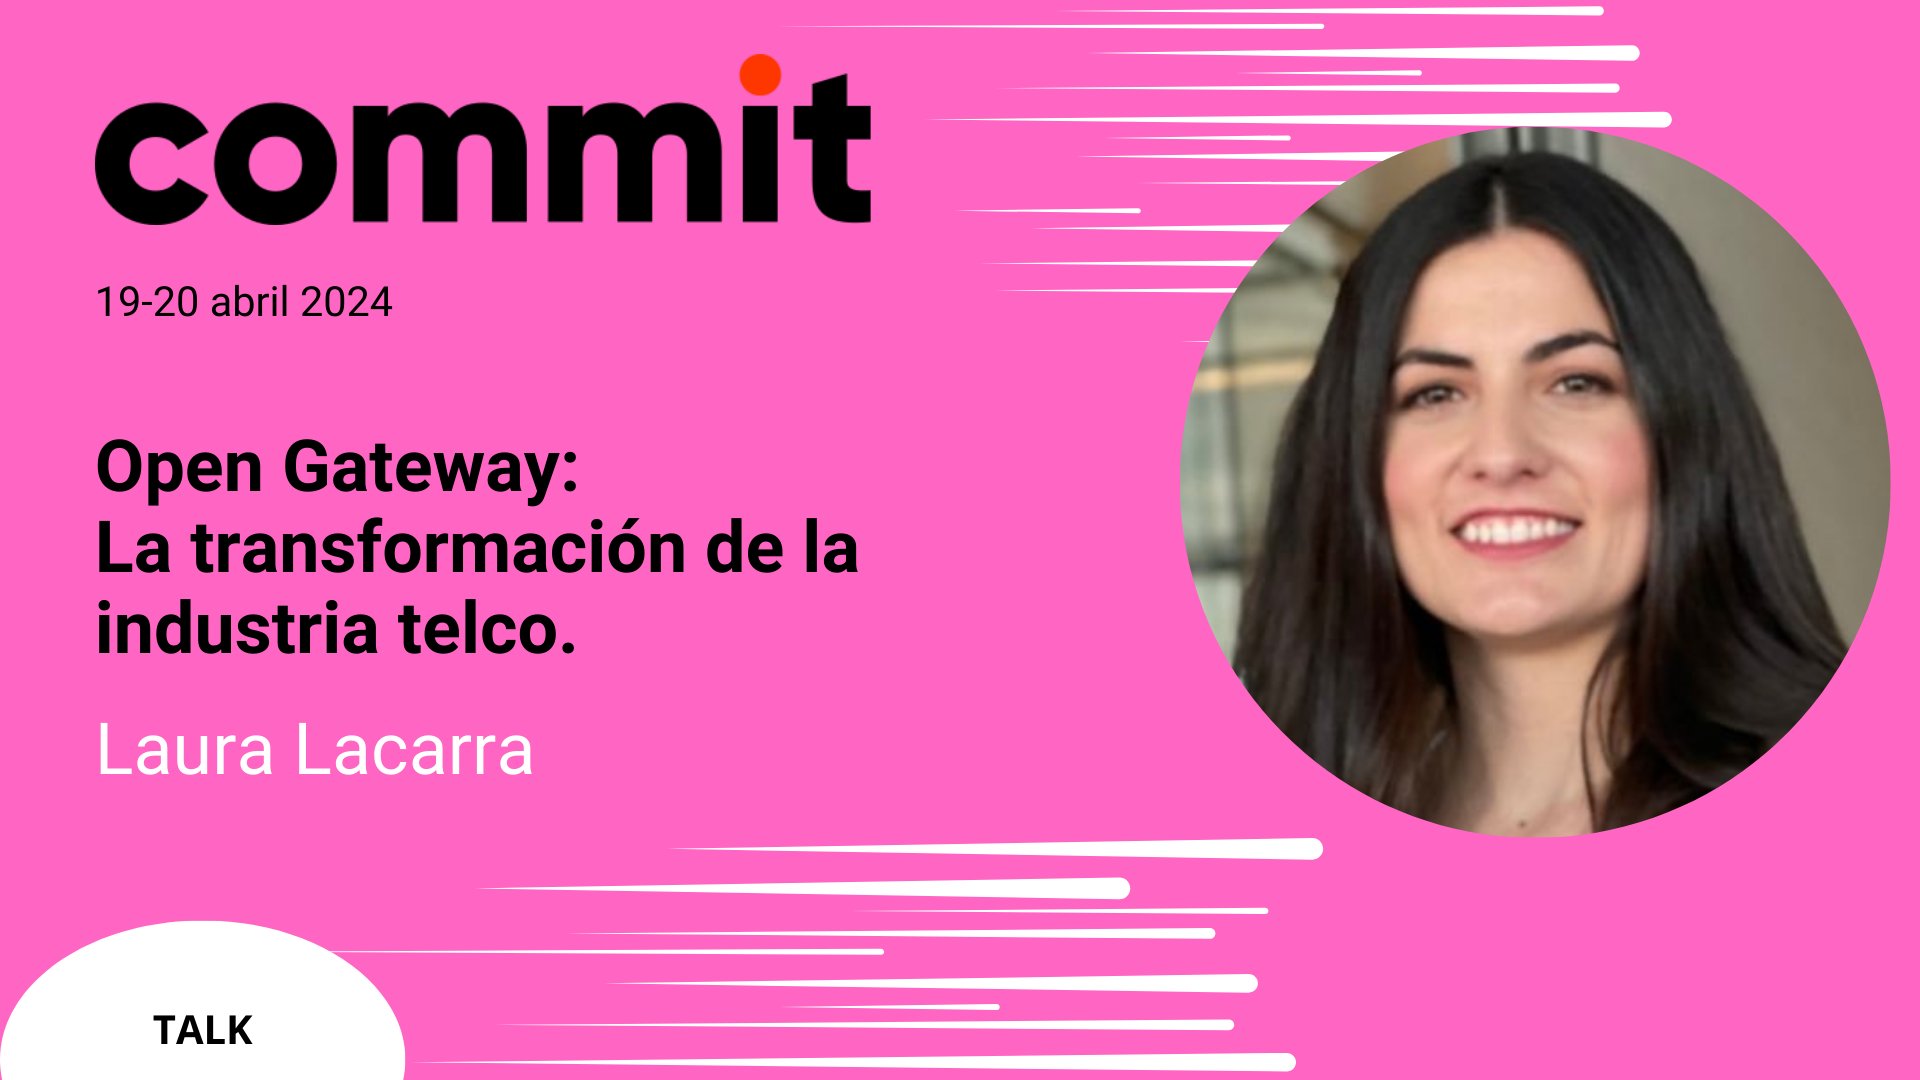 Discover Telefónica Open Gateway's participation in Commit Conf 2024.